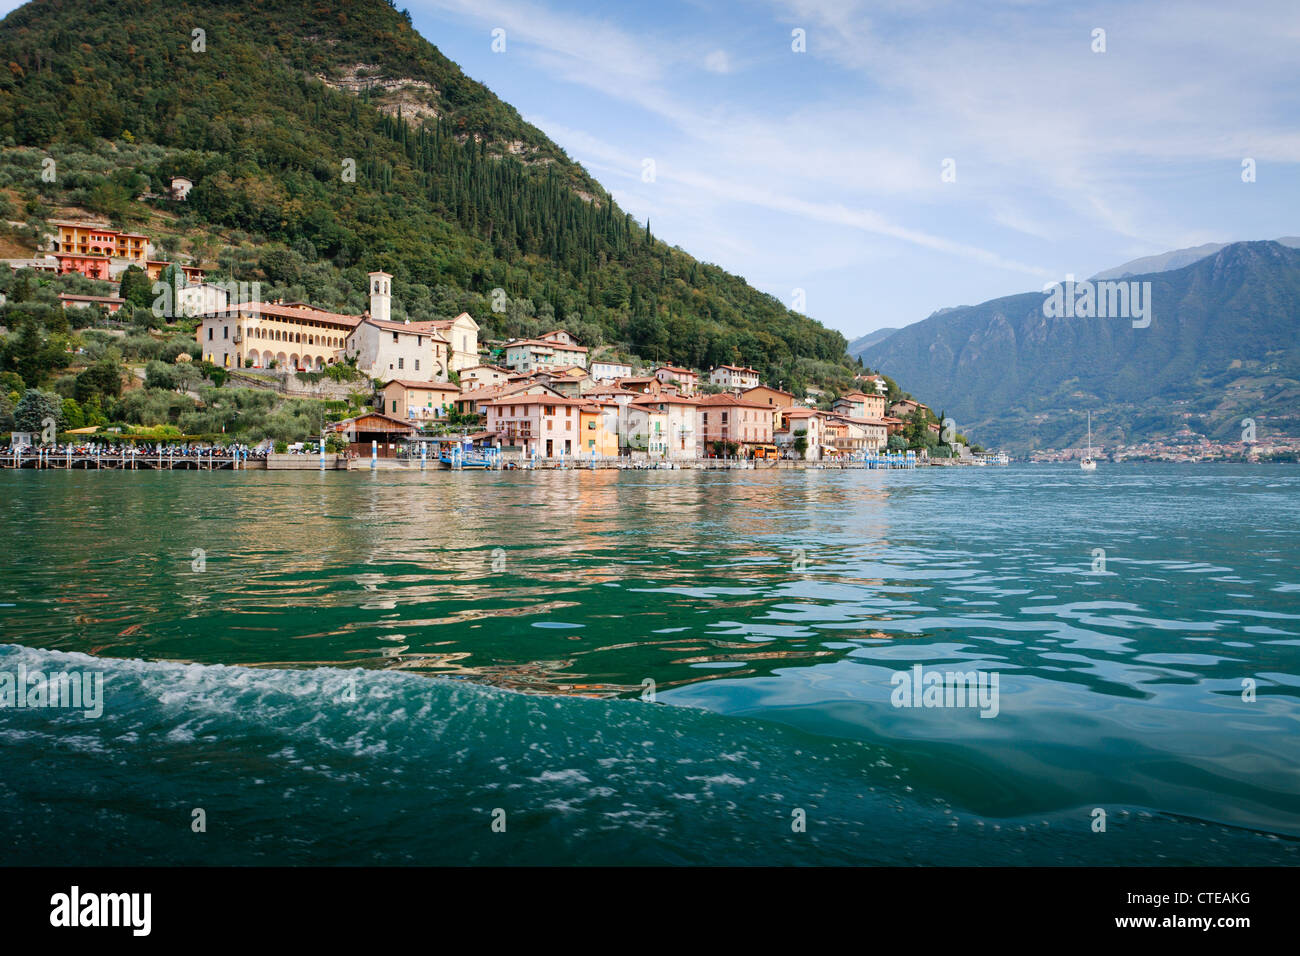 Town of Peschiera, Monte Isola, viewed from boat from Sulzano, with steep hill behind and reflection in water. Stock Photo